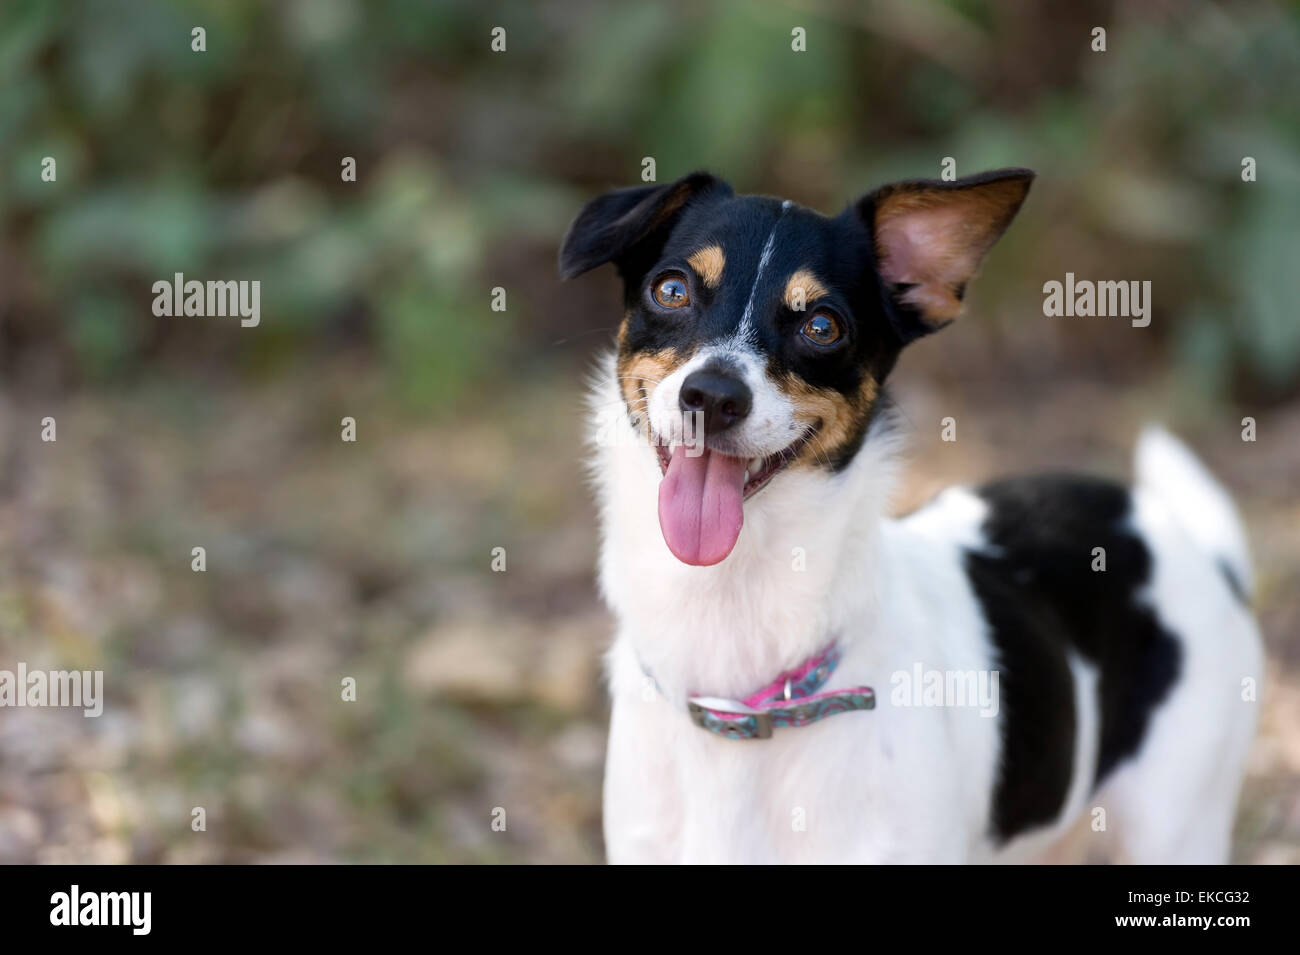 Crazy Curious dog is looking happily with his tongue hanging out. Stock Photo